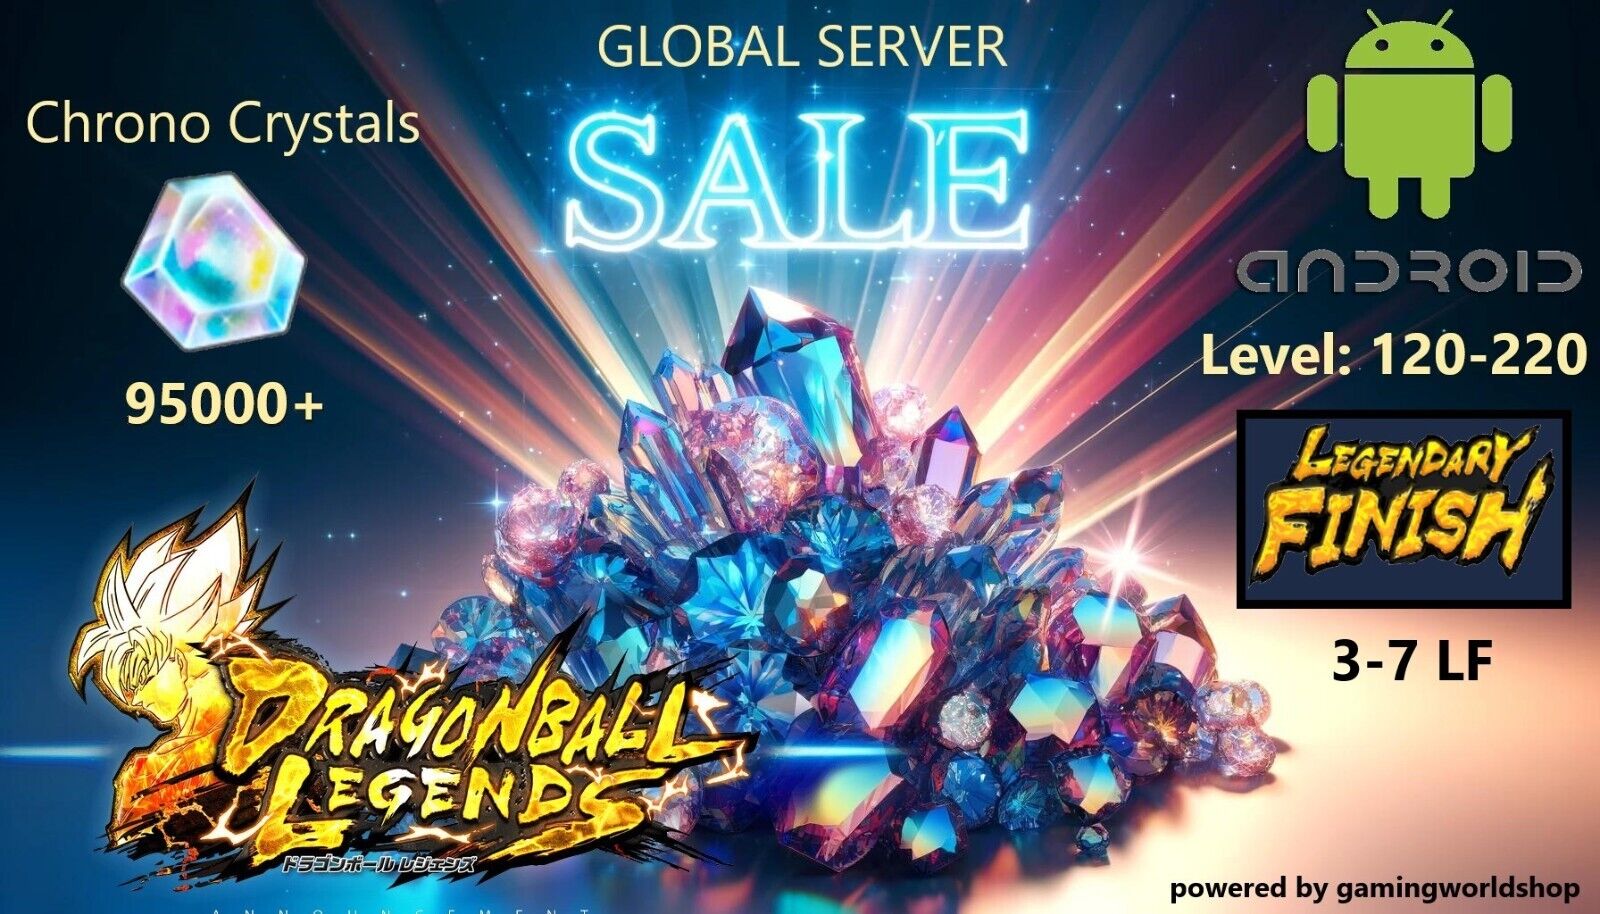 Dragon Ball Legends Android/Global 100000+ Chrono Crystals, Level 120-220 3-8LF